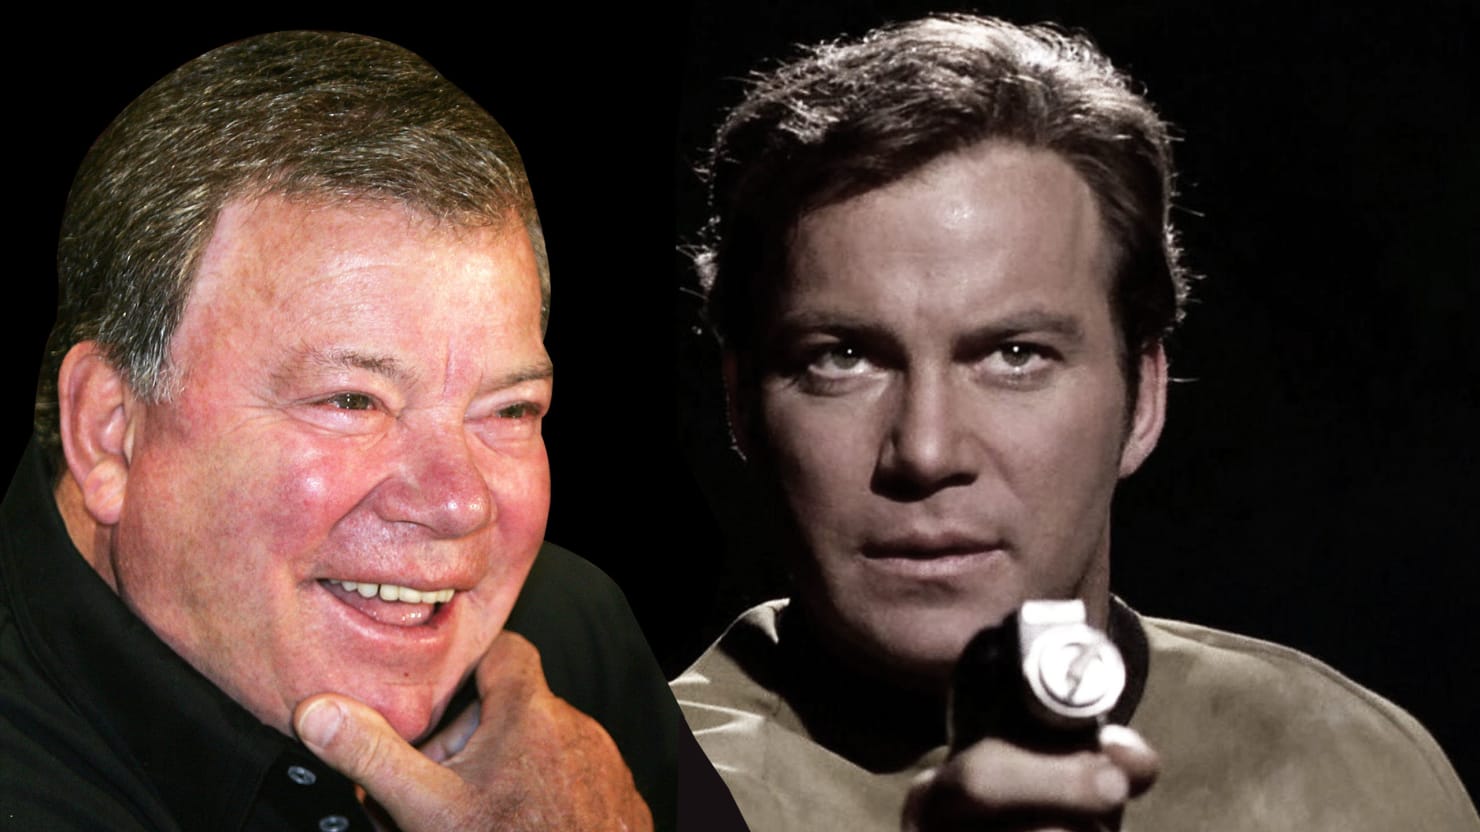 William Shatner on 50 Years of Star Trek the Passing of David Bowie